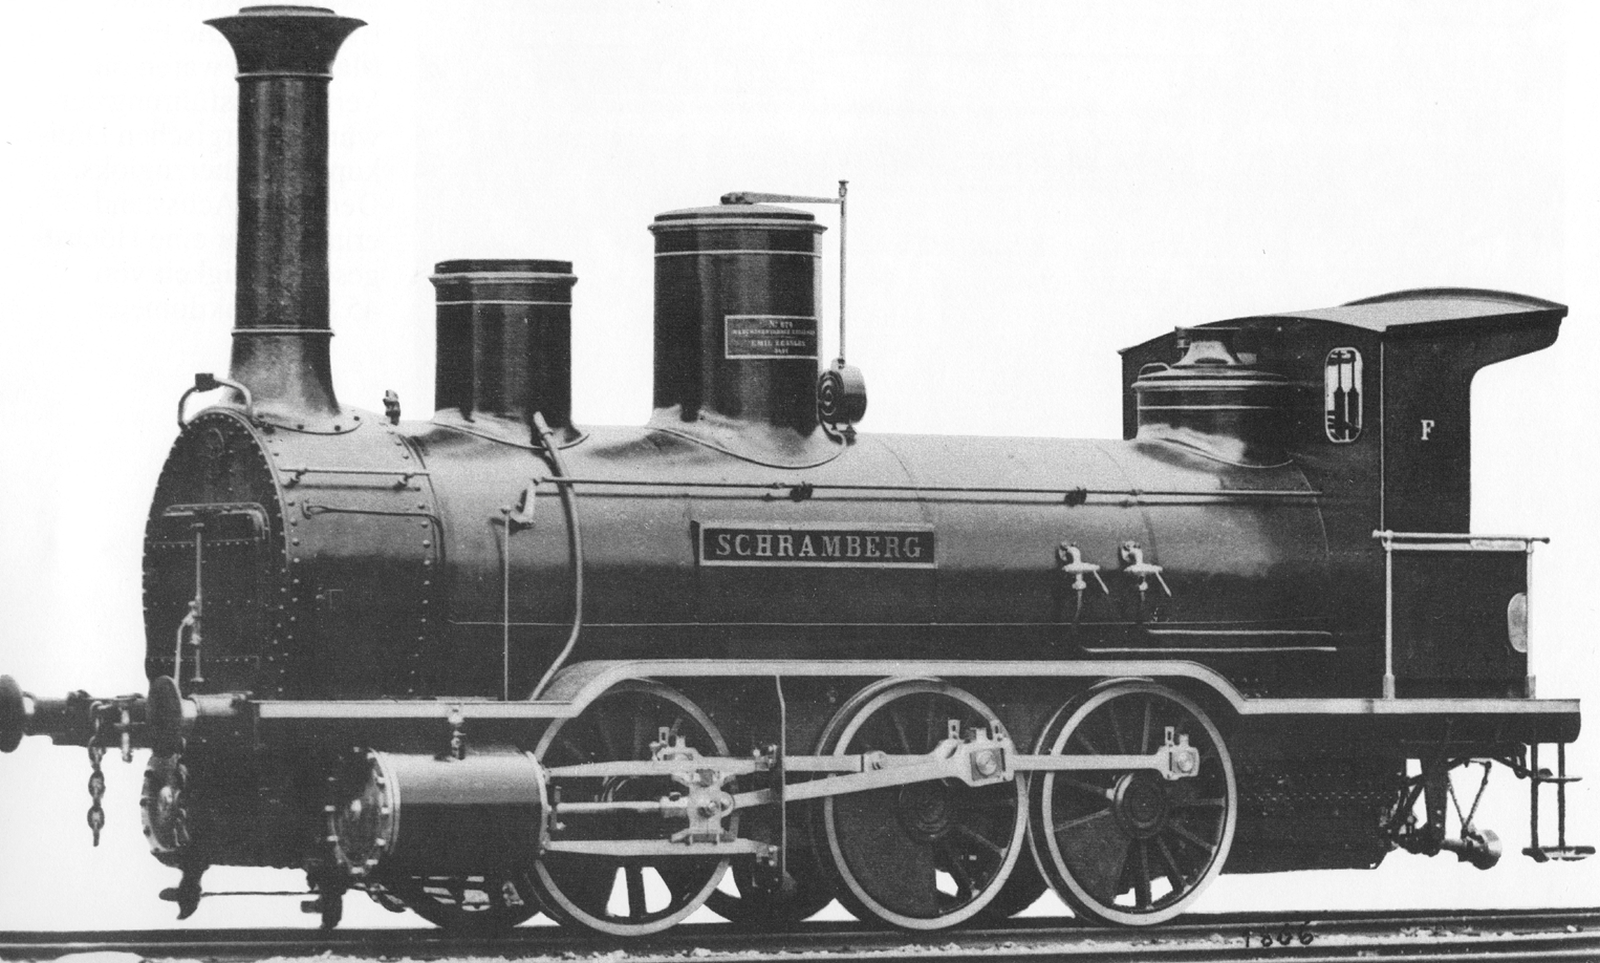 The locomotive with the name Schramberg in a works photo of the Esslingen machine factory from 1866